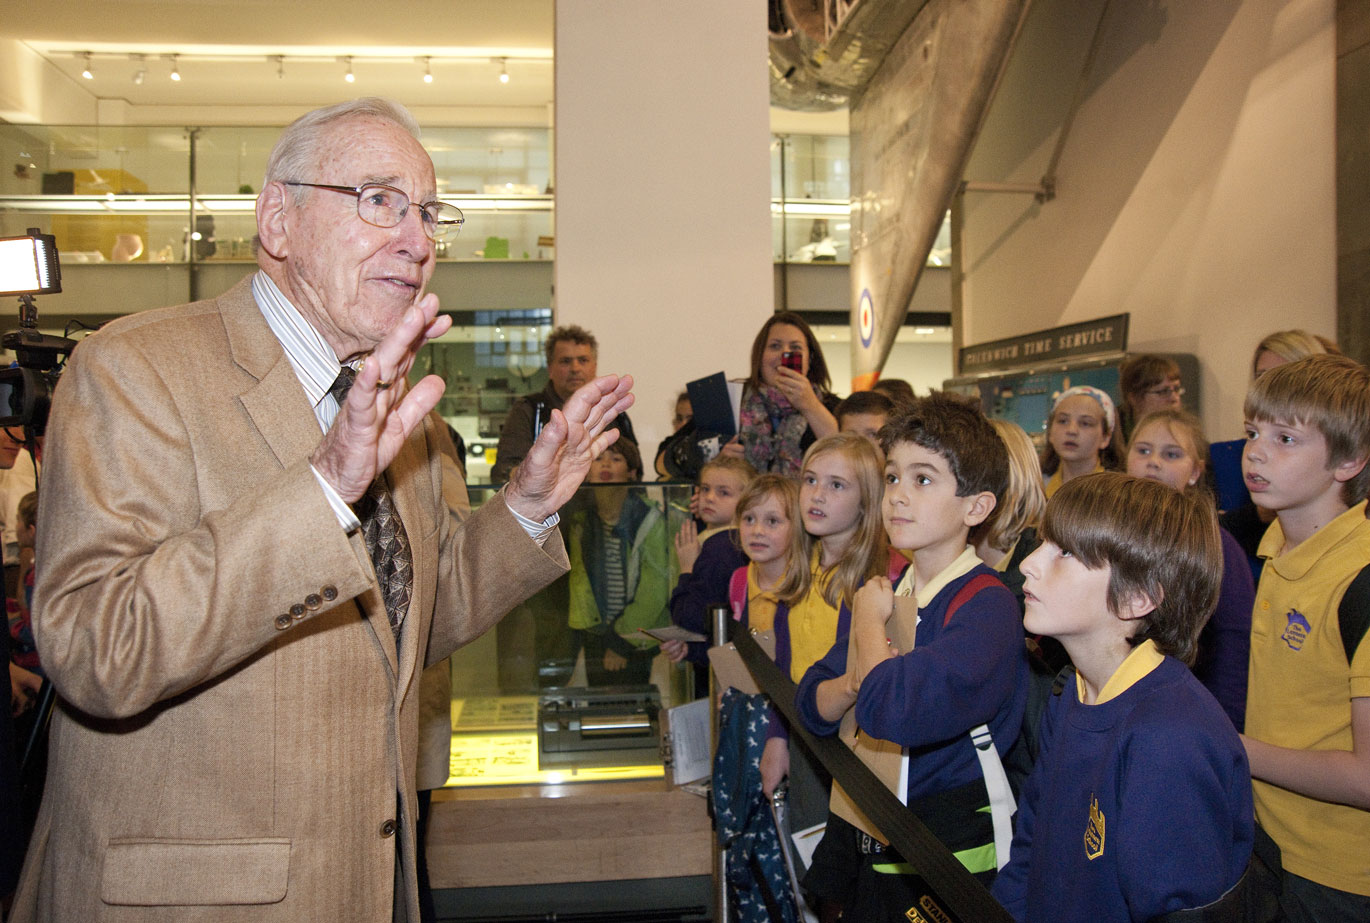 Astronaut Jim Lovell meeting school children at the Science Museum.